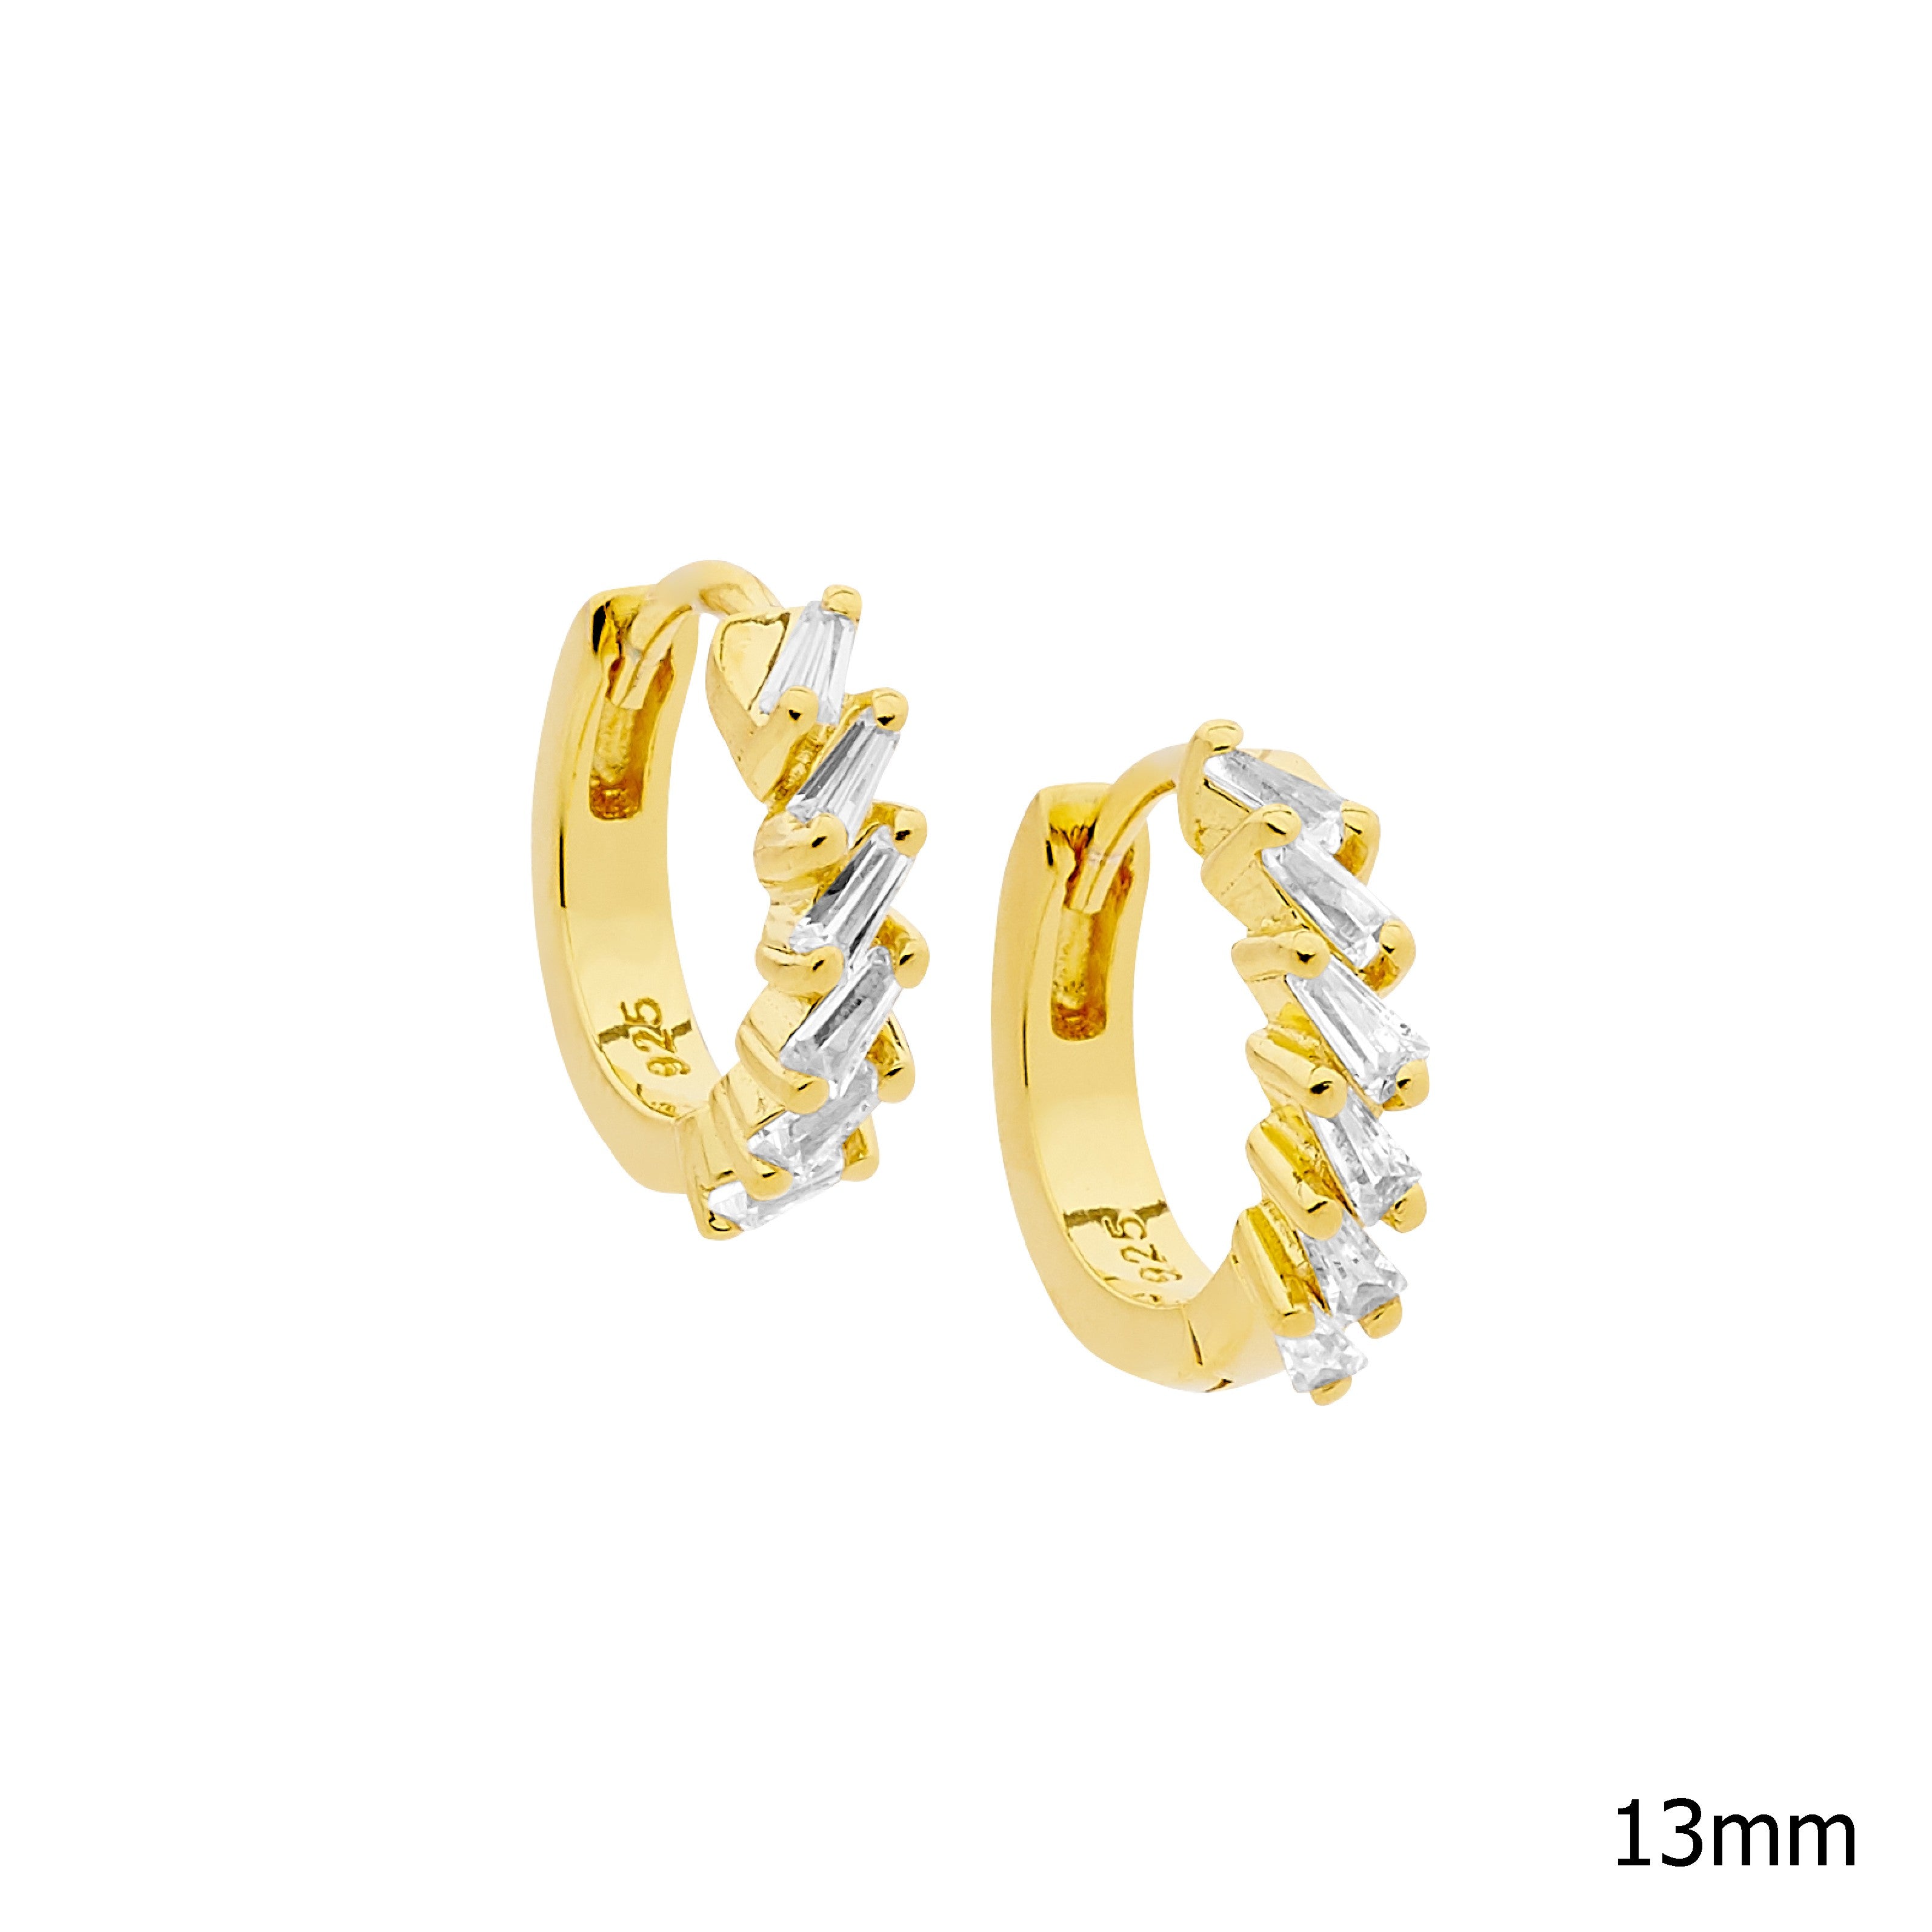 Gold plated sterling silver cubic zirconia huggie earrings